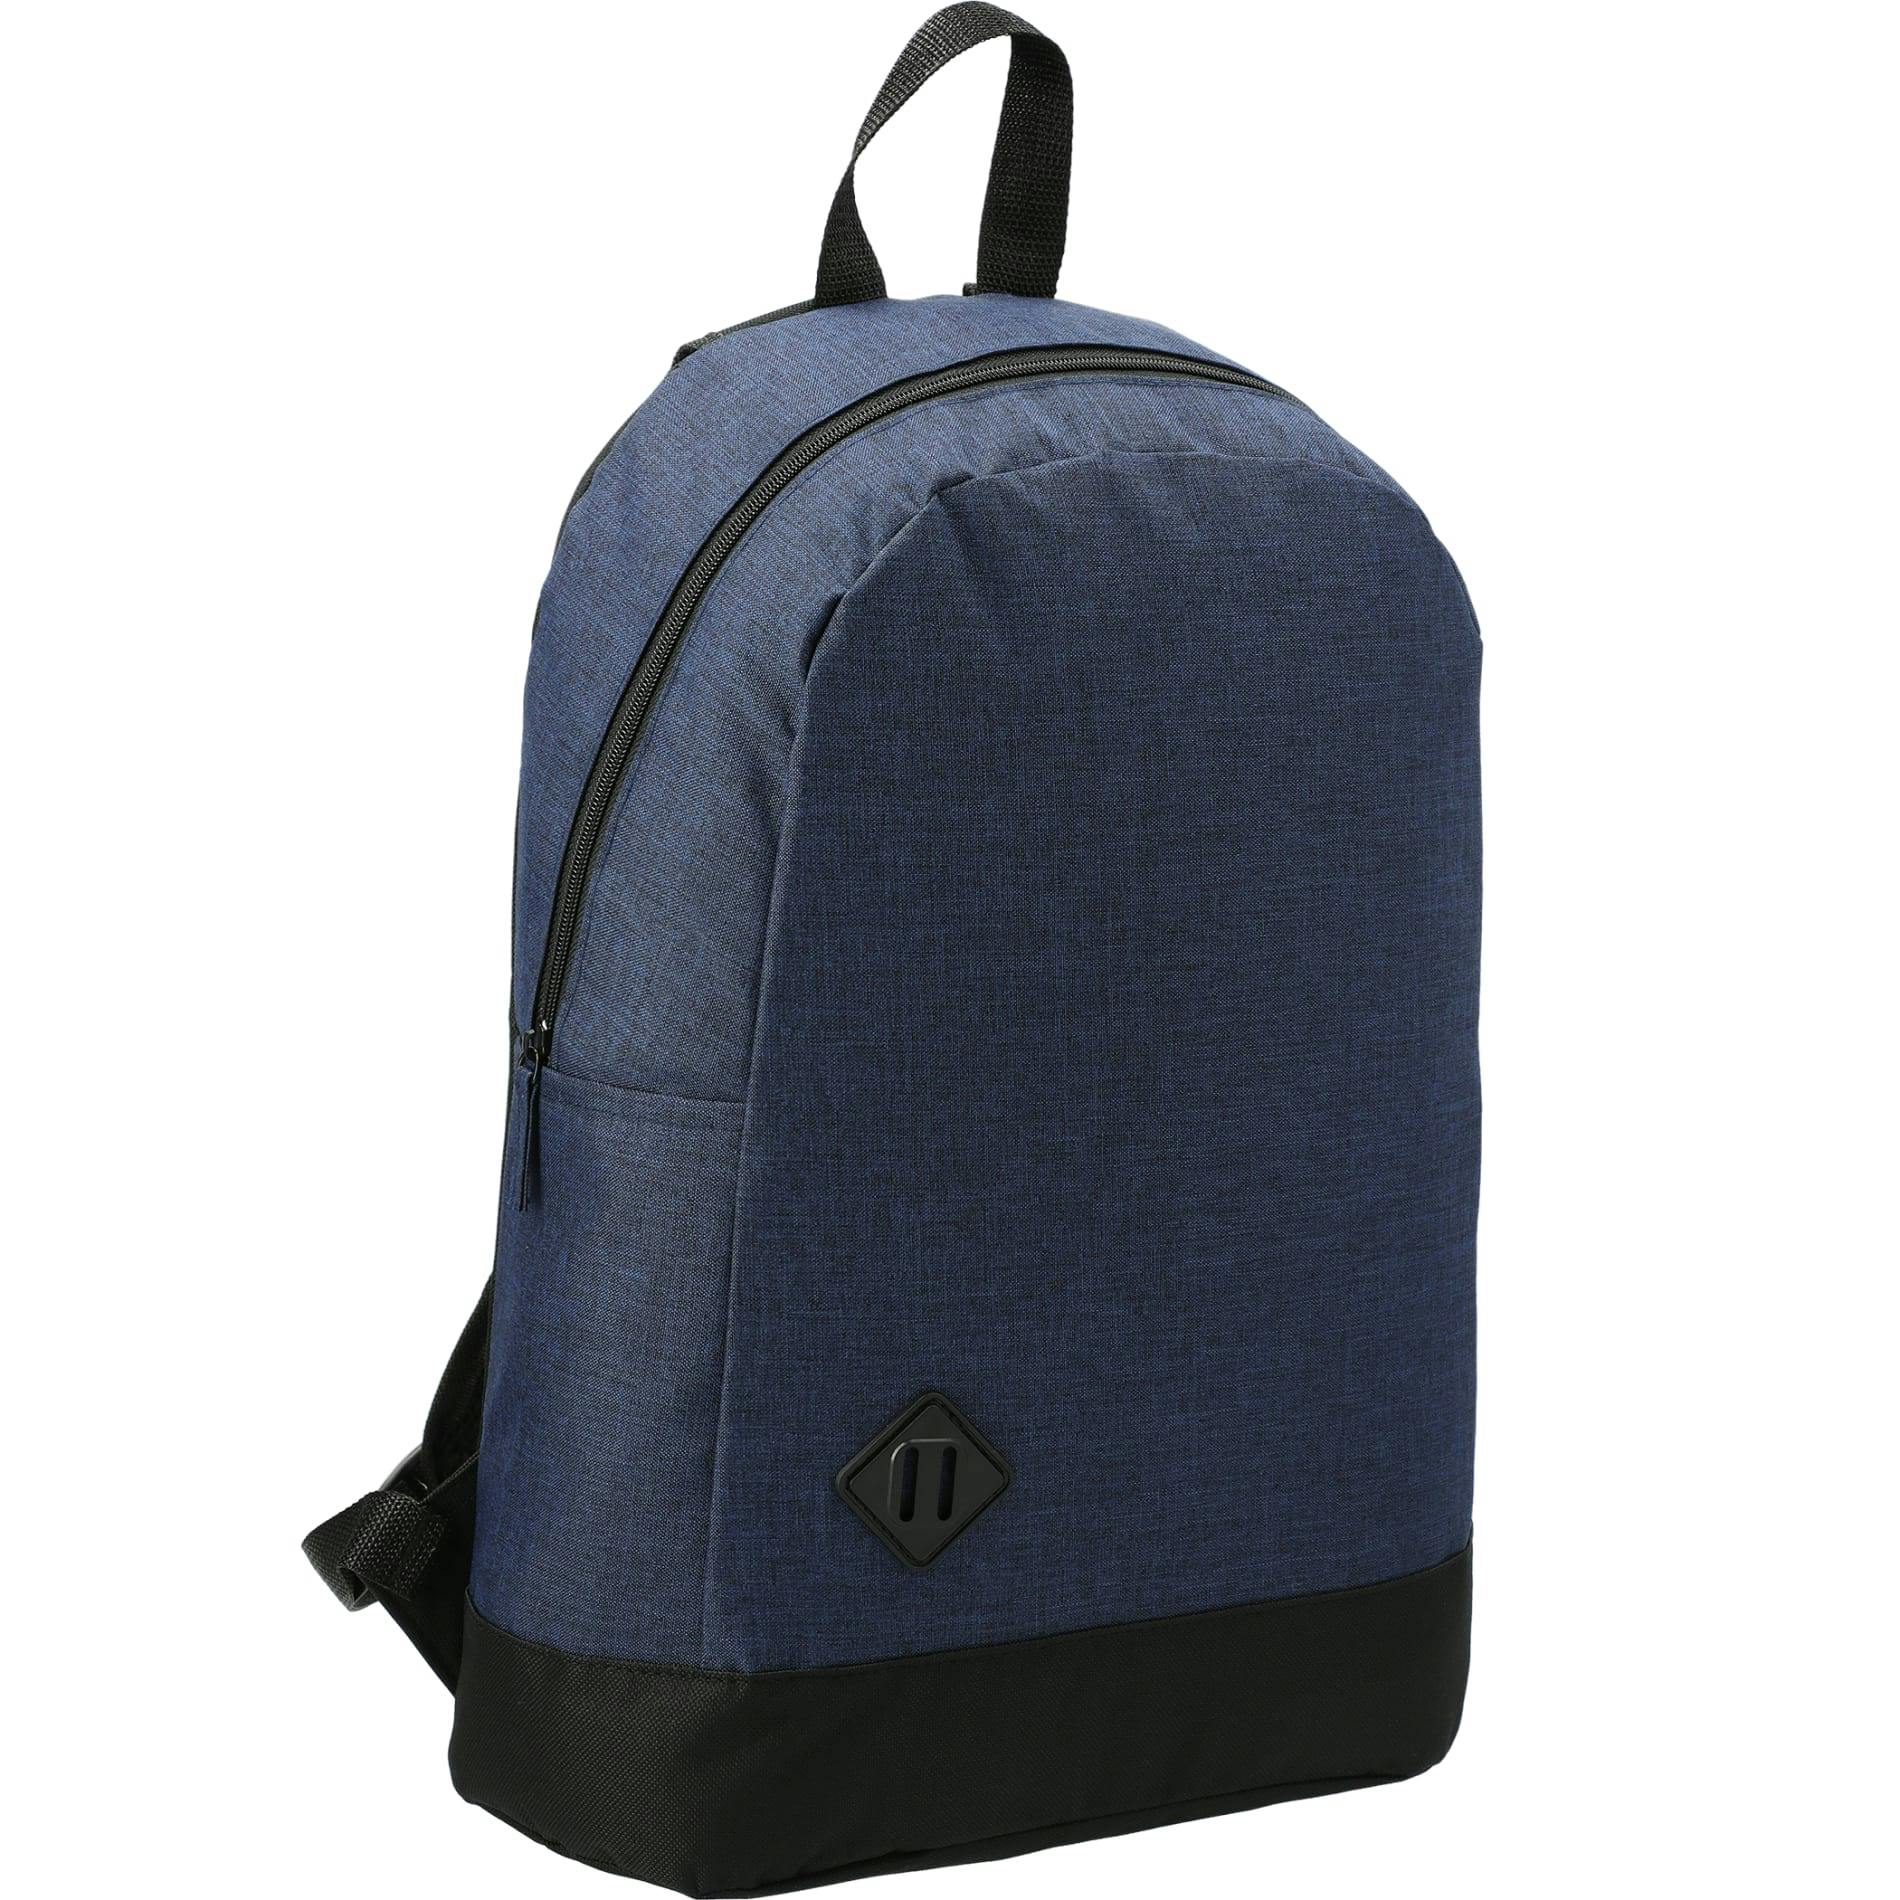 Graphite Dome 15" Computer Backpack - additional Image 3